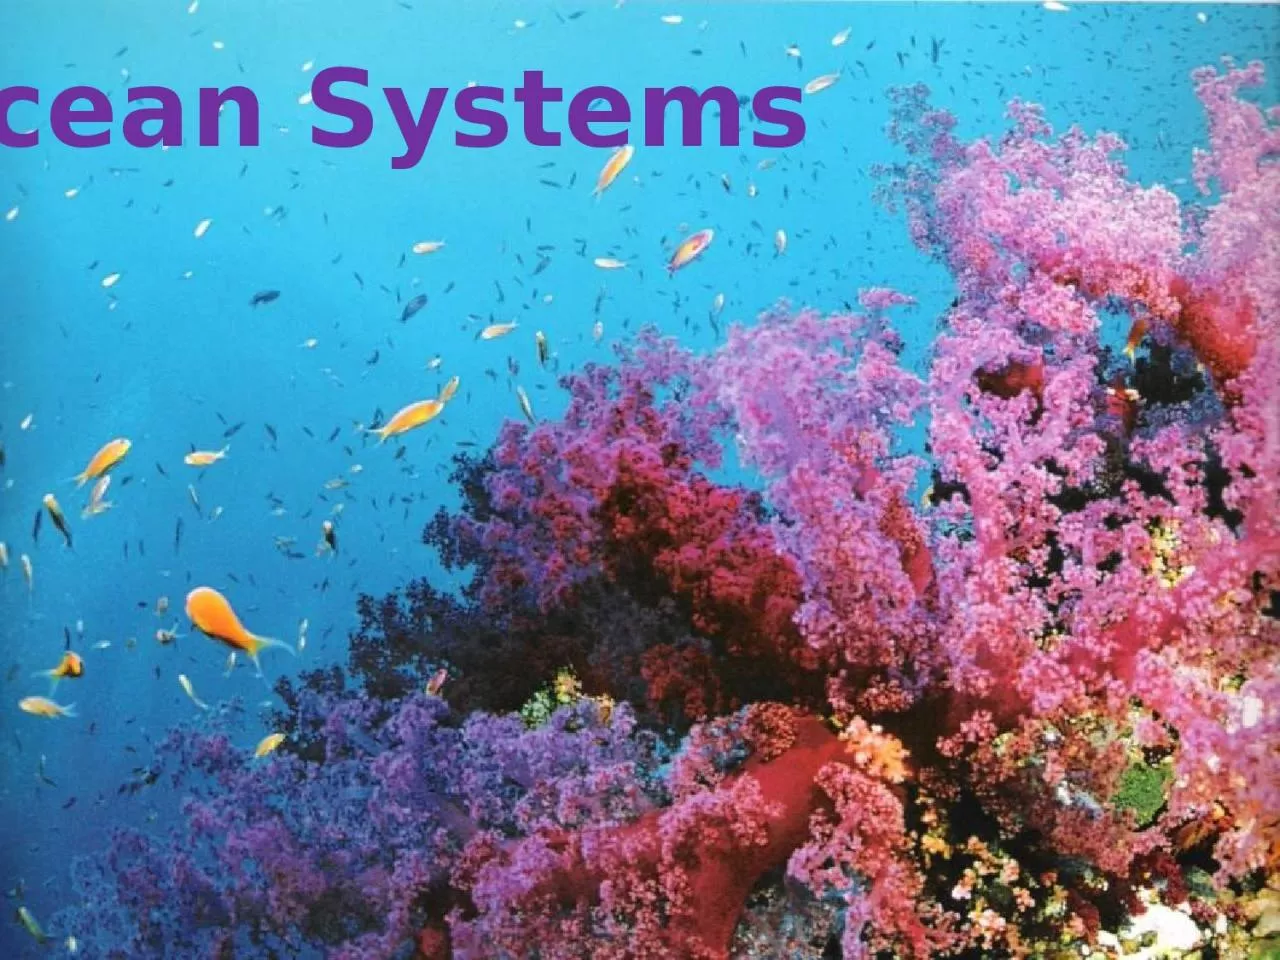 Ocean Systems We Depend on the Ocean for Food